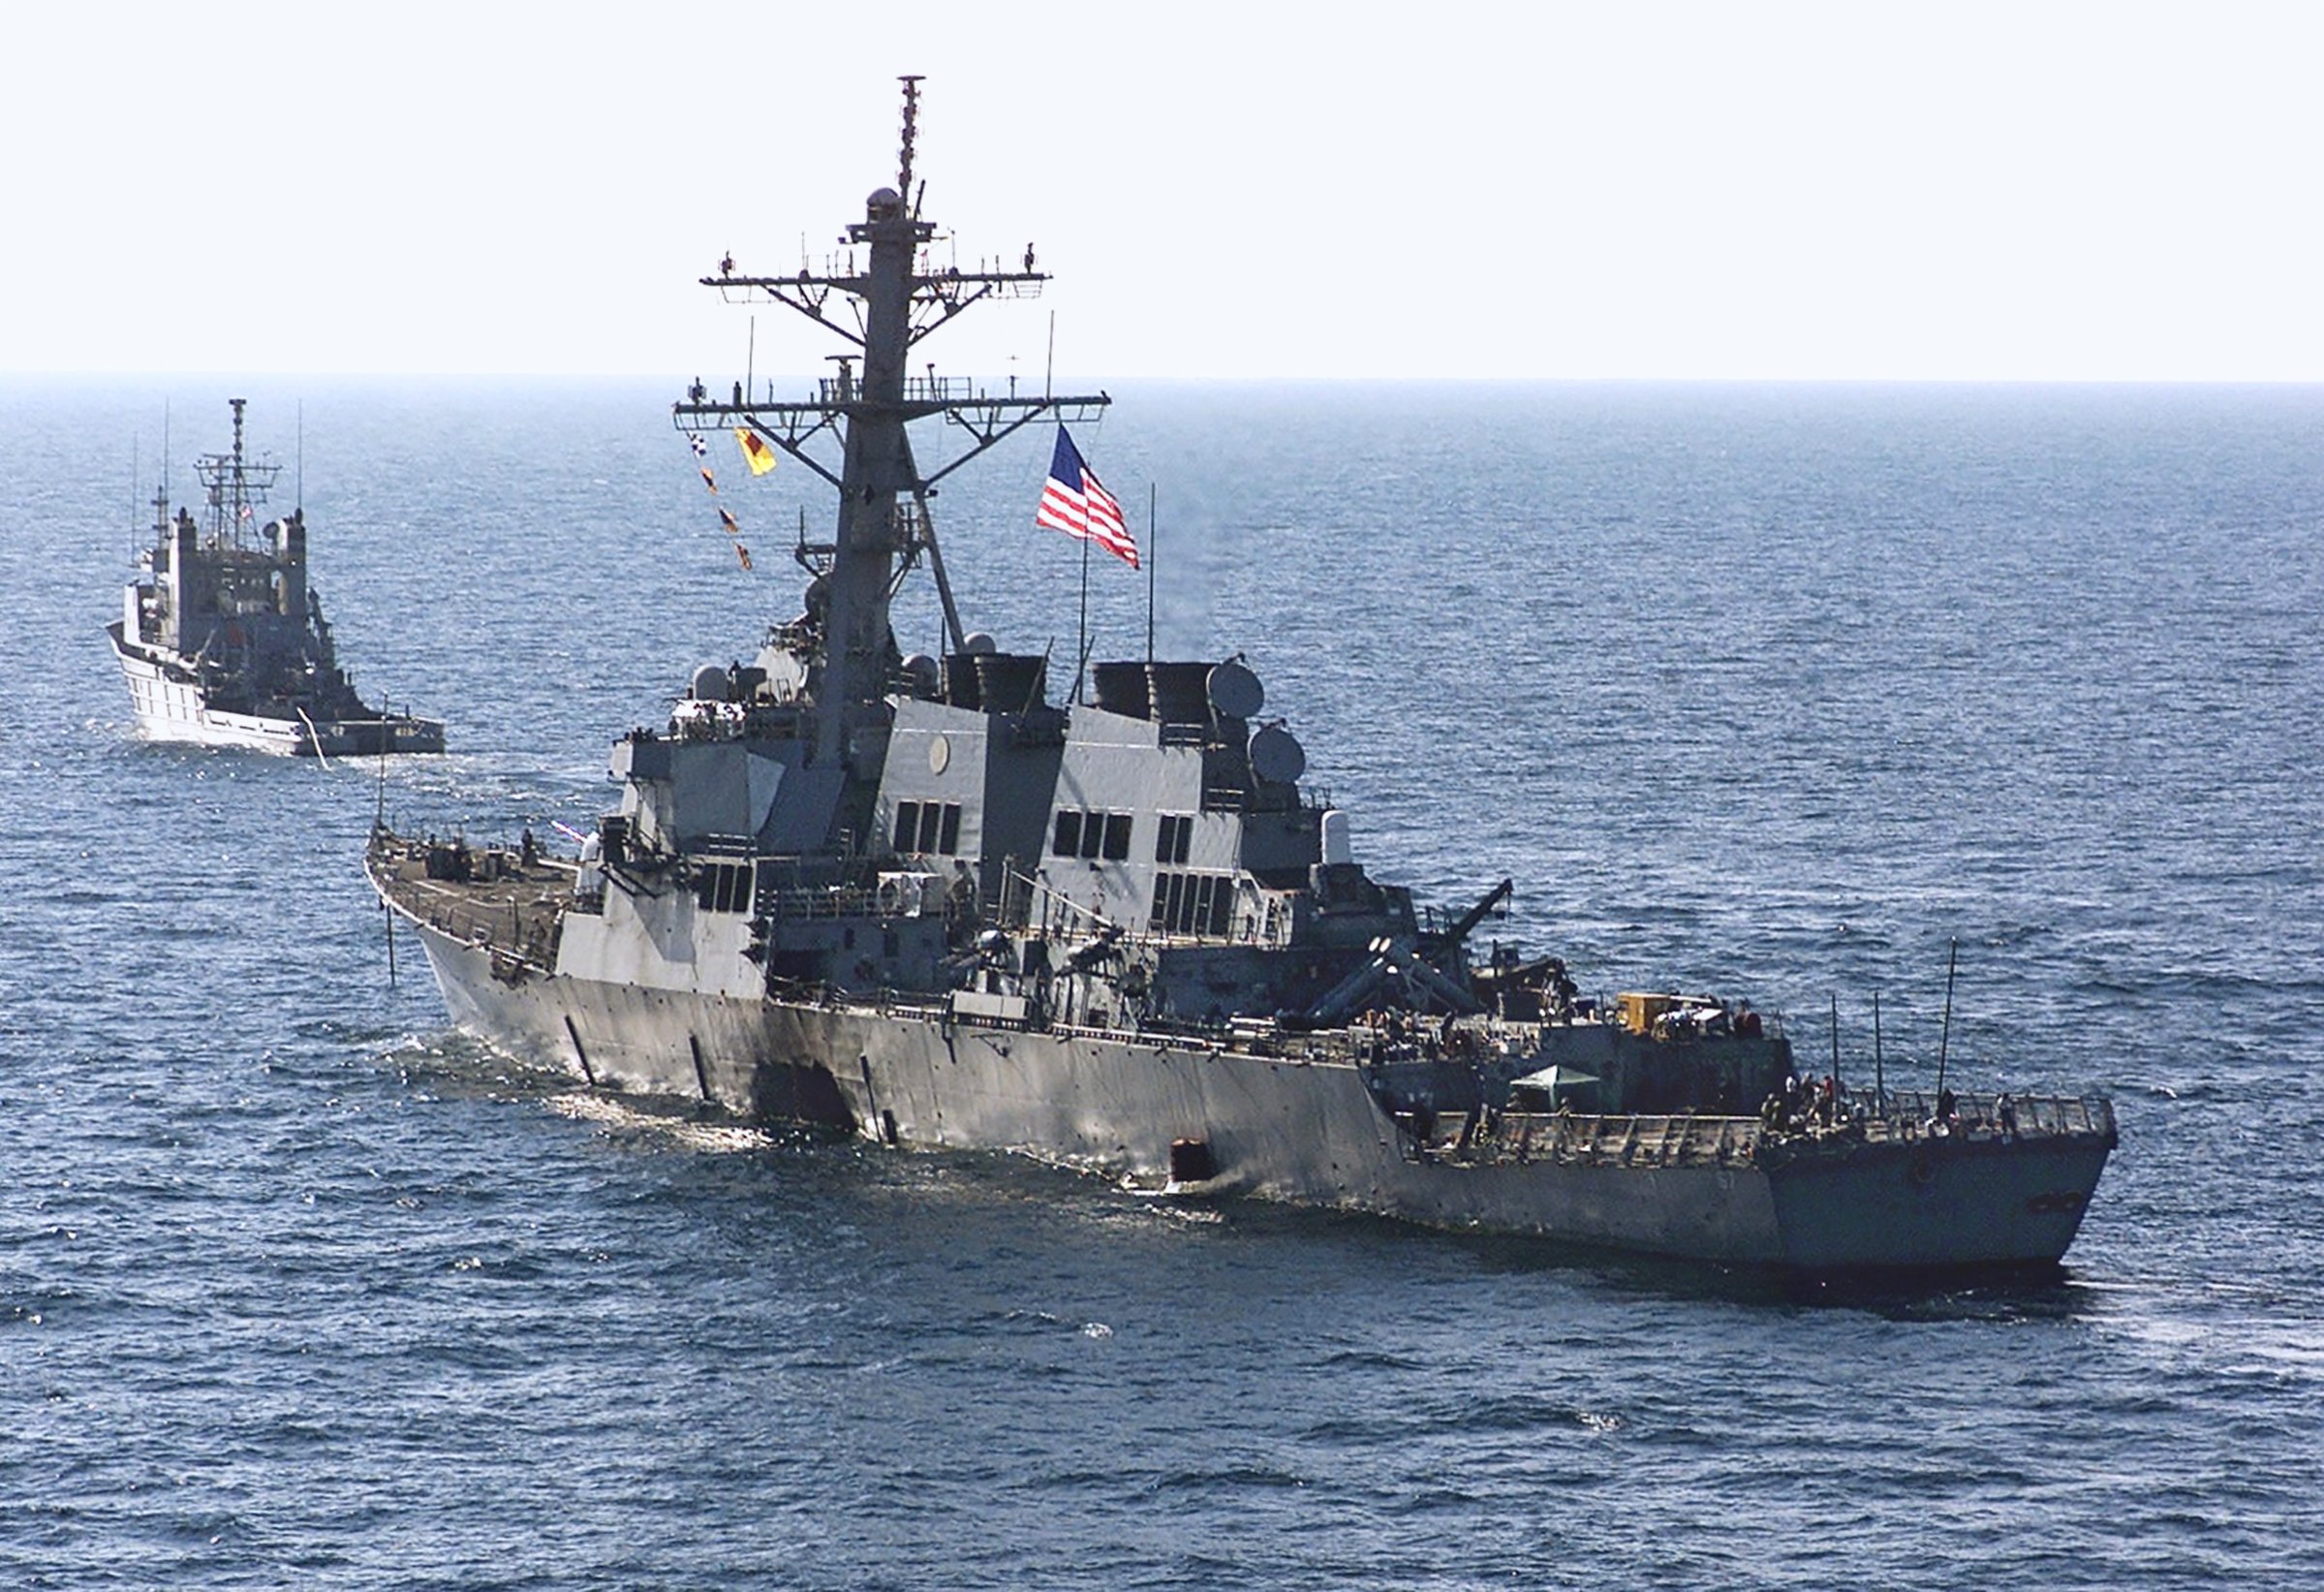 The U.S.S. Cole was attacked in Yemen on Oct. 12, 2000